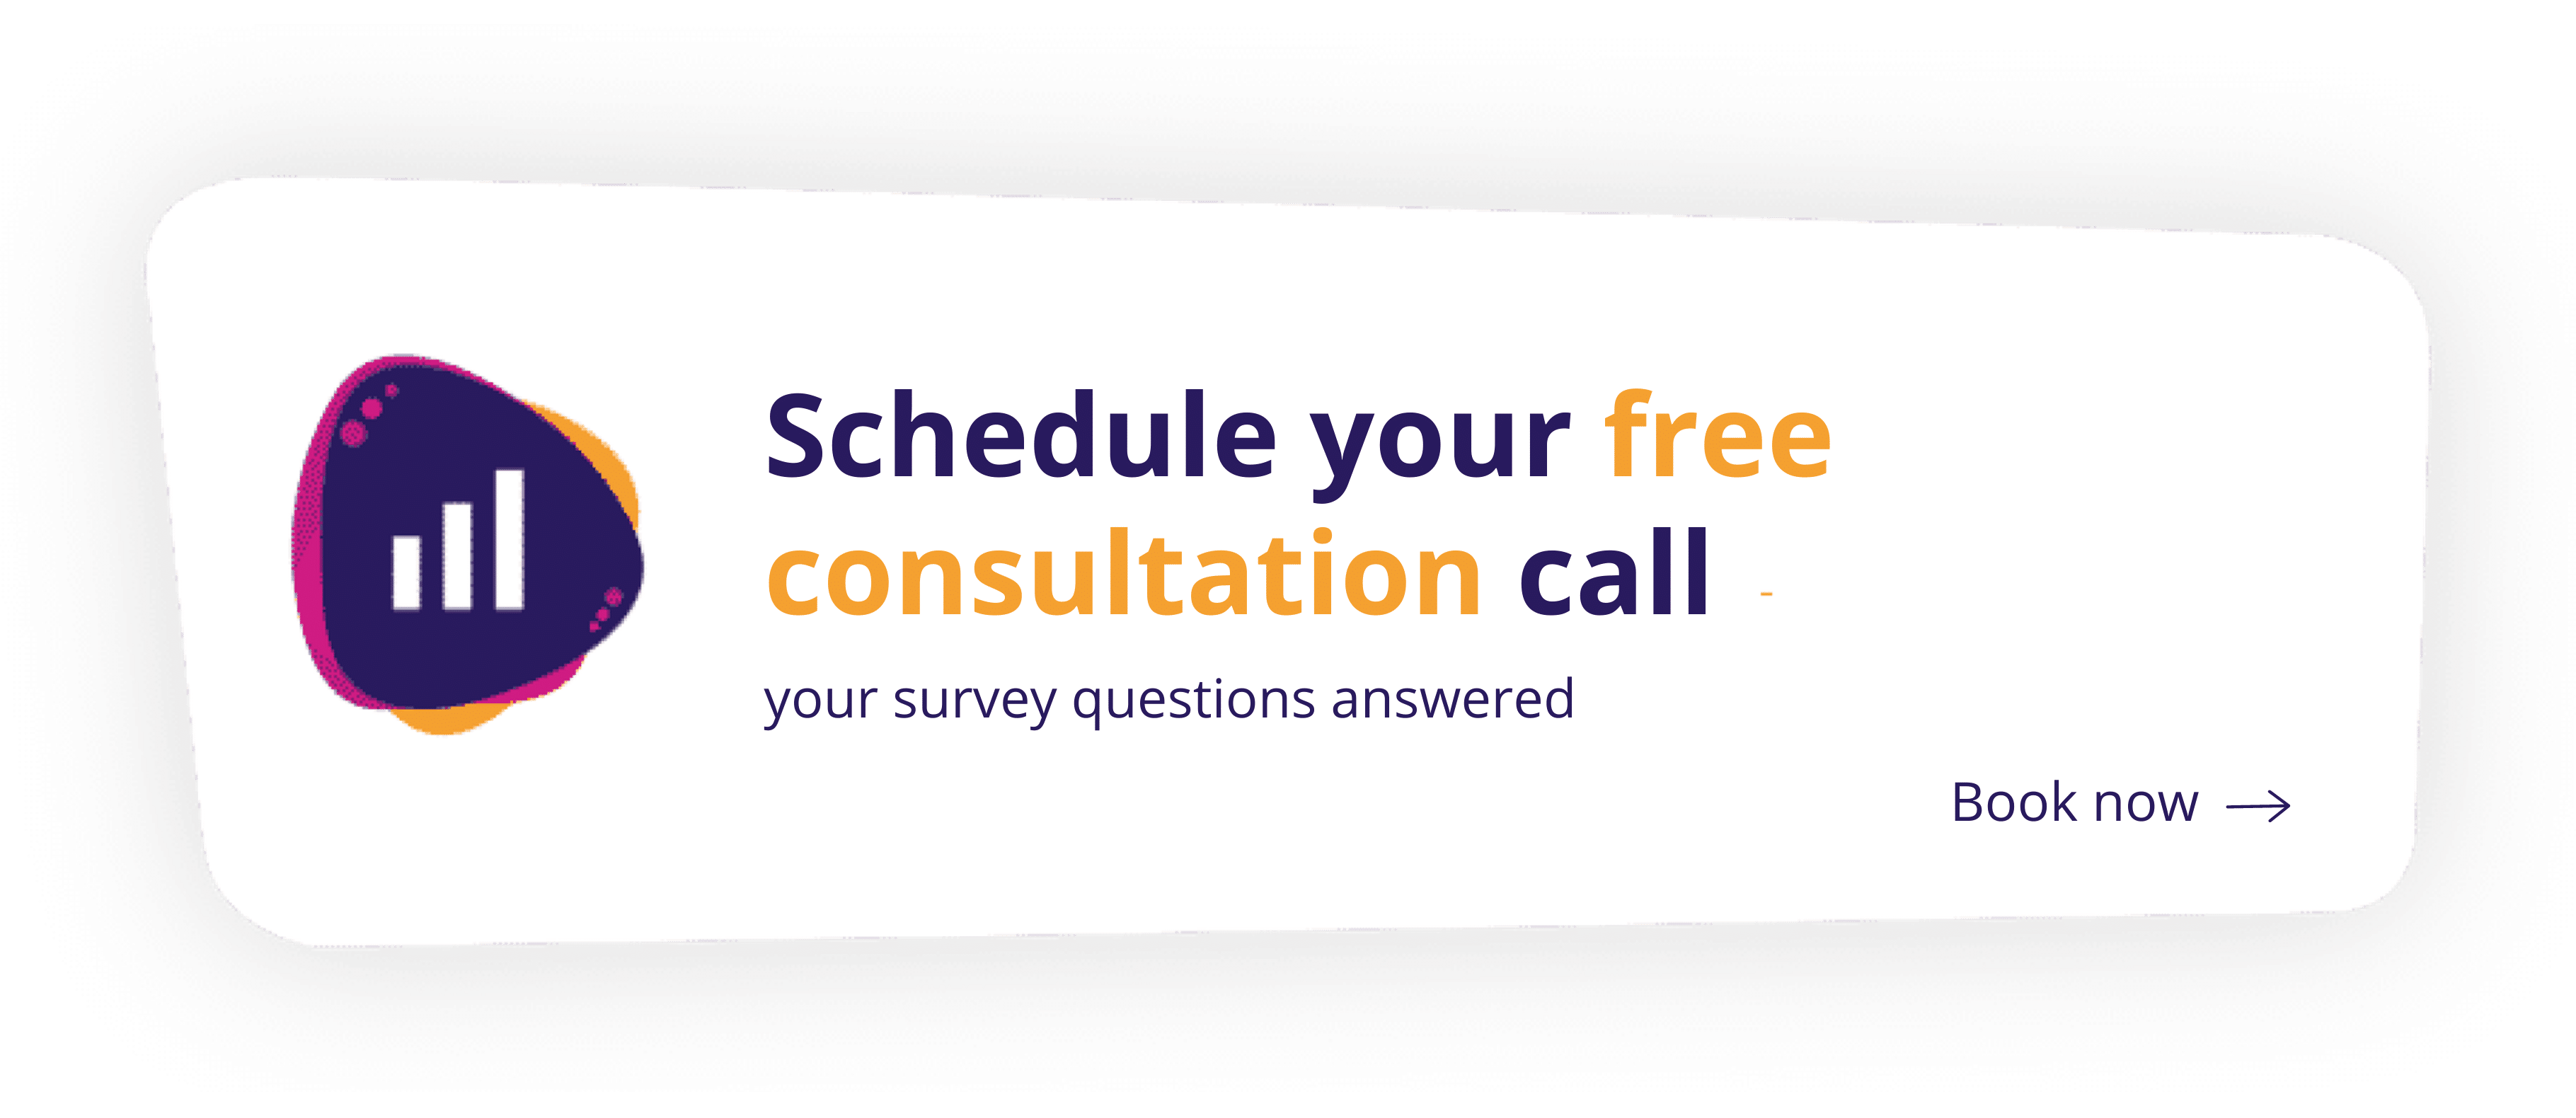 Schedule free consultation call to learn how to create effective surveys for training